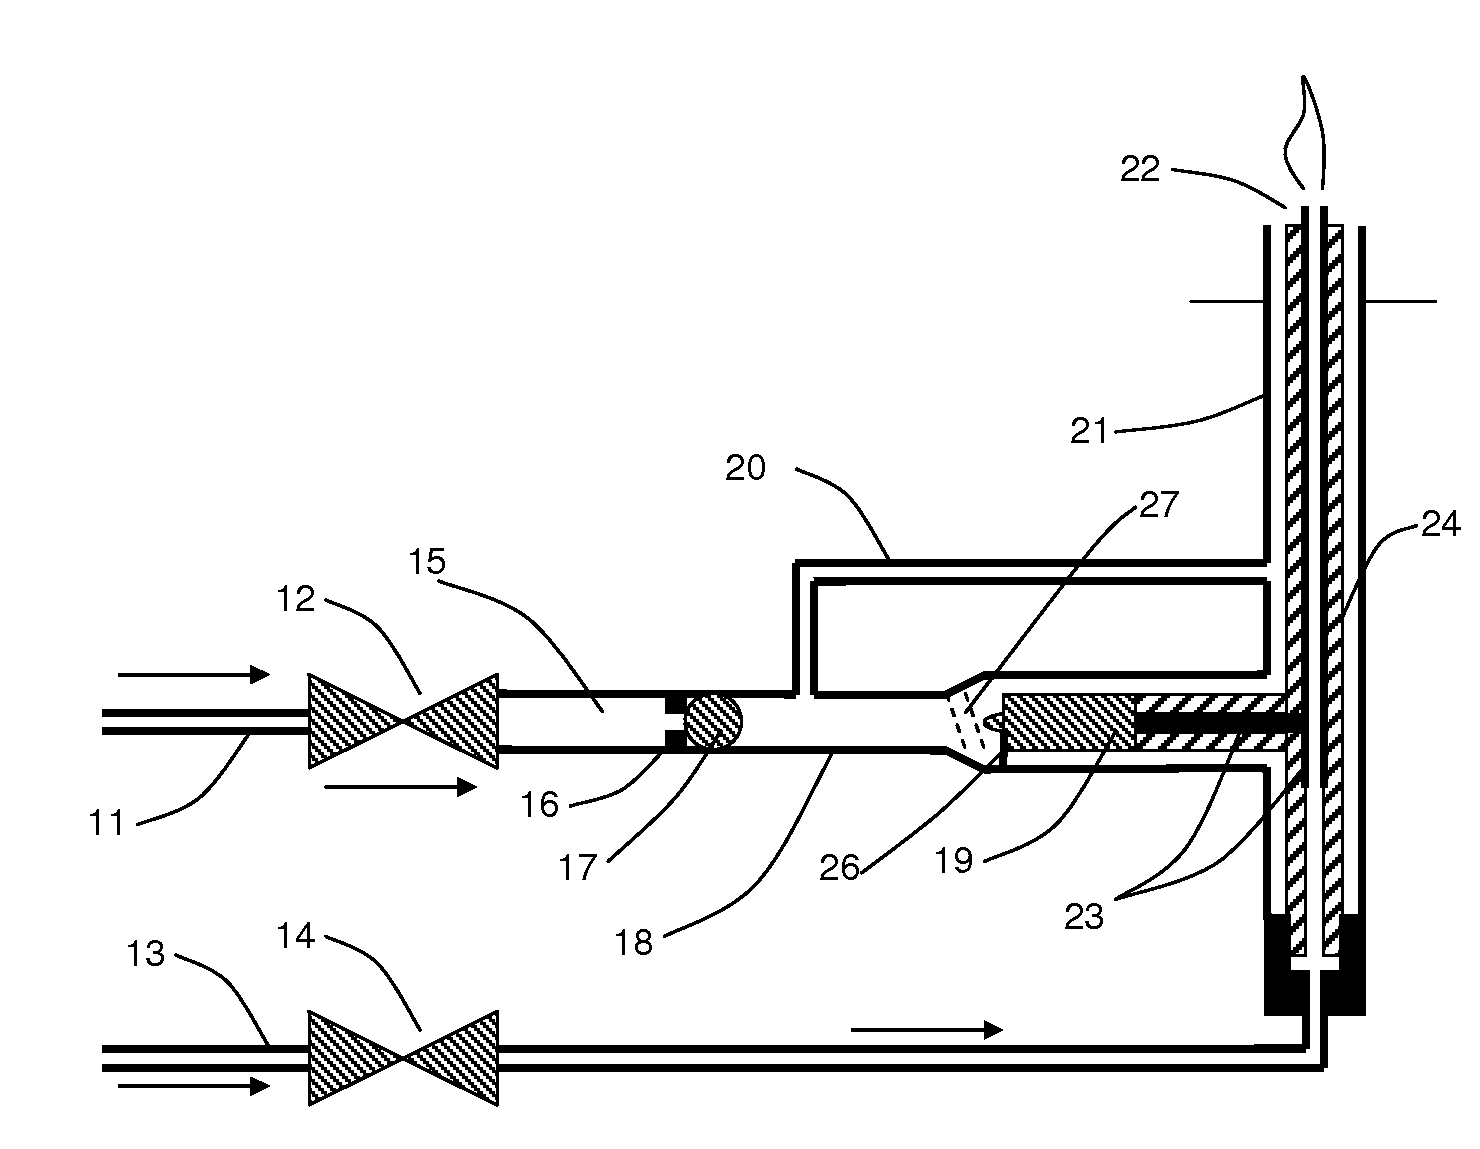 Propellant Flow Actuated Piezoelectric Igniter for Combustion Engines